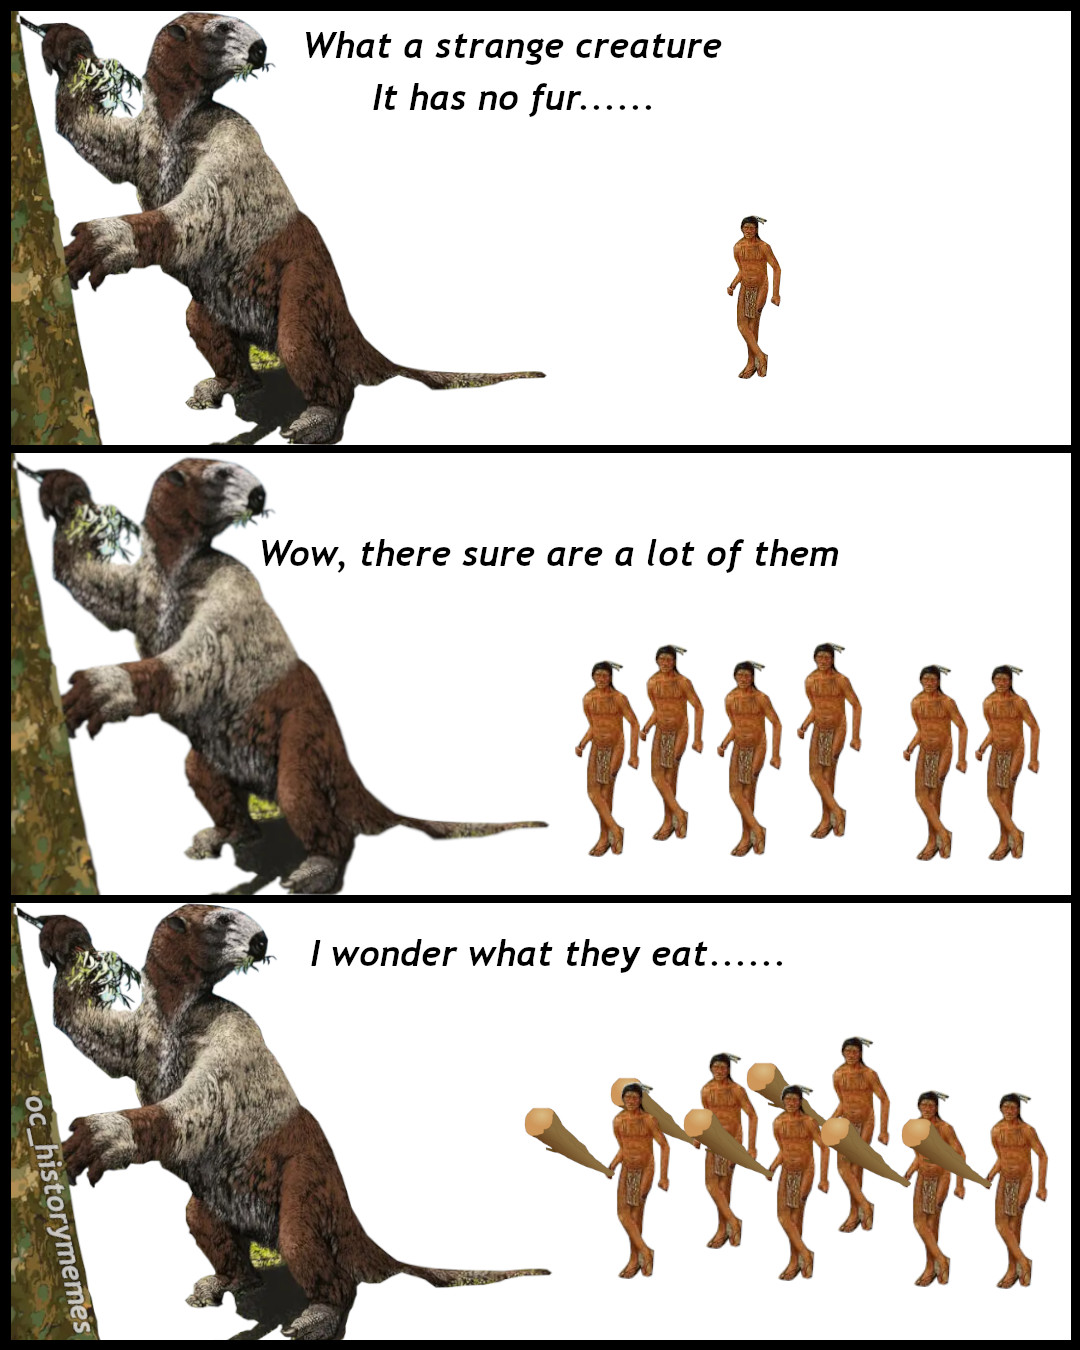 fauna - What a strange creature It has no fur...... Wow, there sure are a lot of them I wonder what they eat...... Oc_historymemes